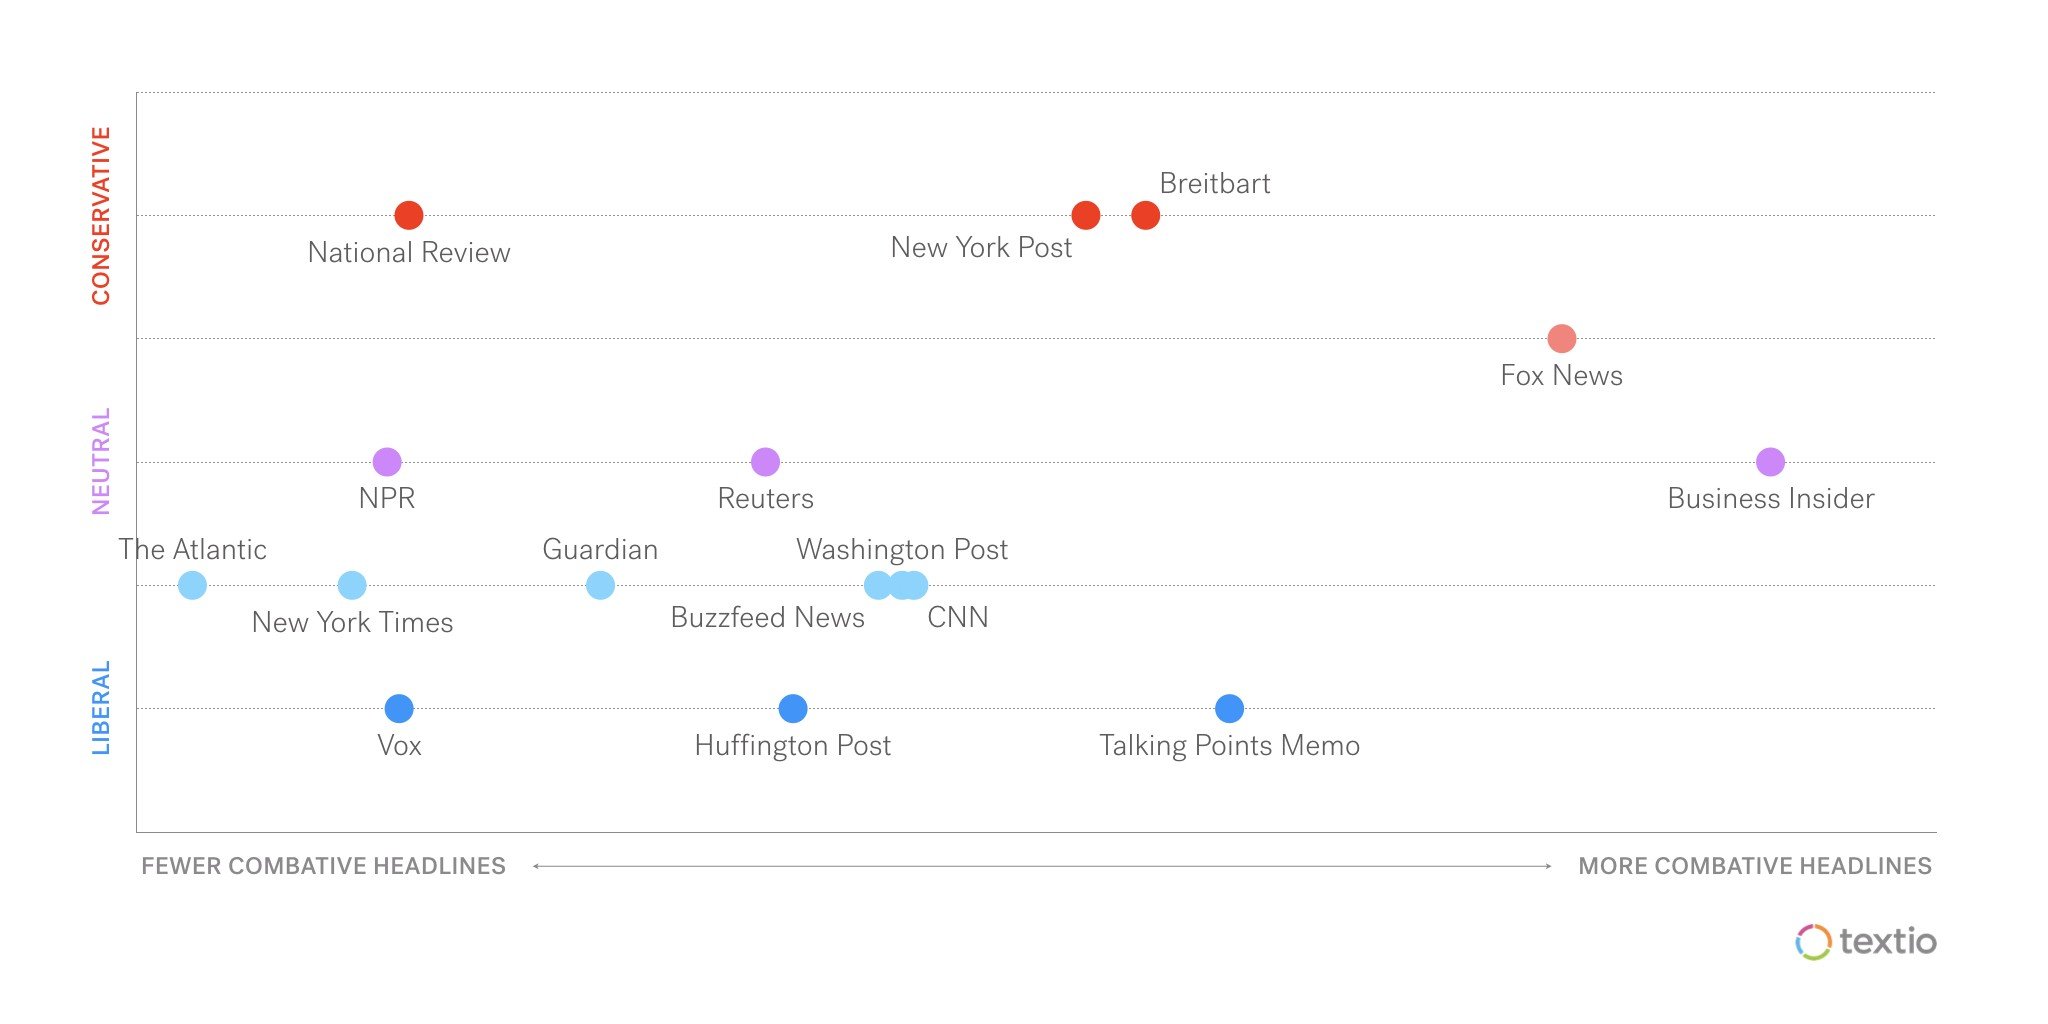 Scatter plot of media outlets on a vertical axis from liberal to conservative and x axis of fewer to more combative headlines